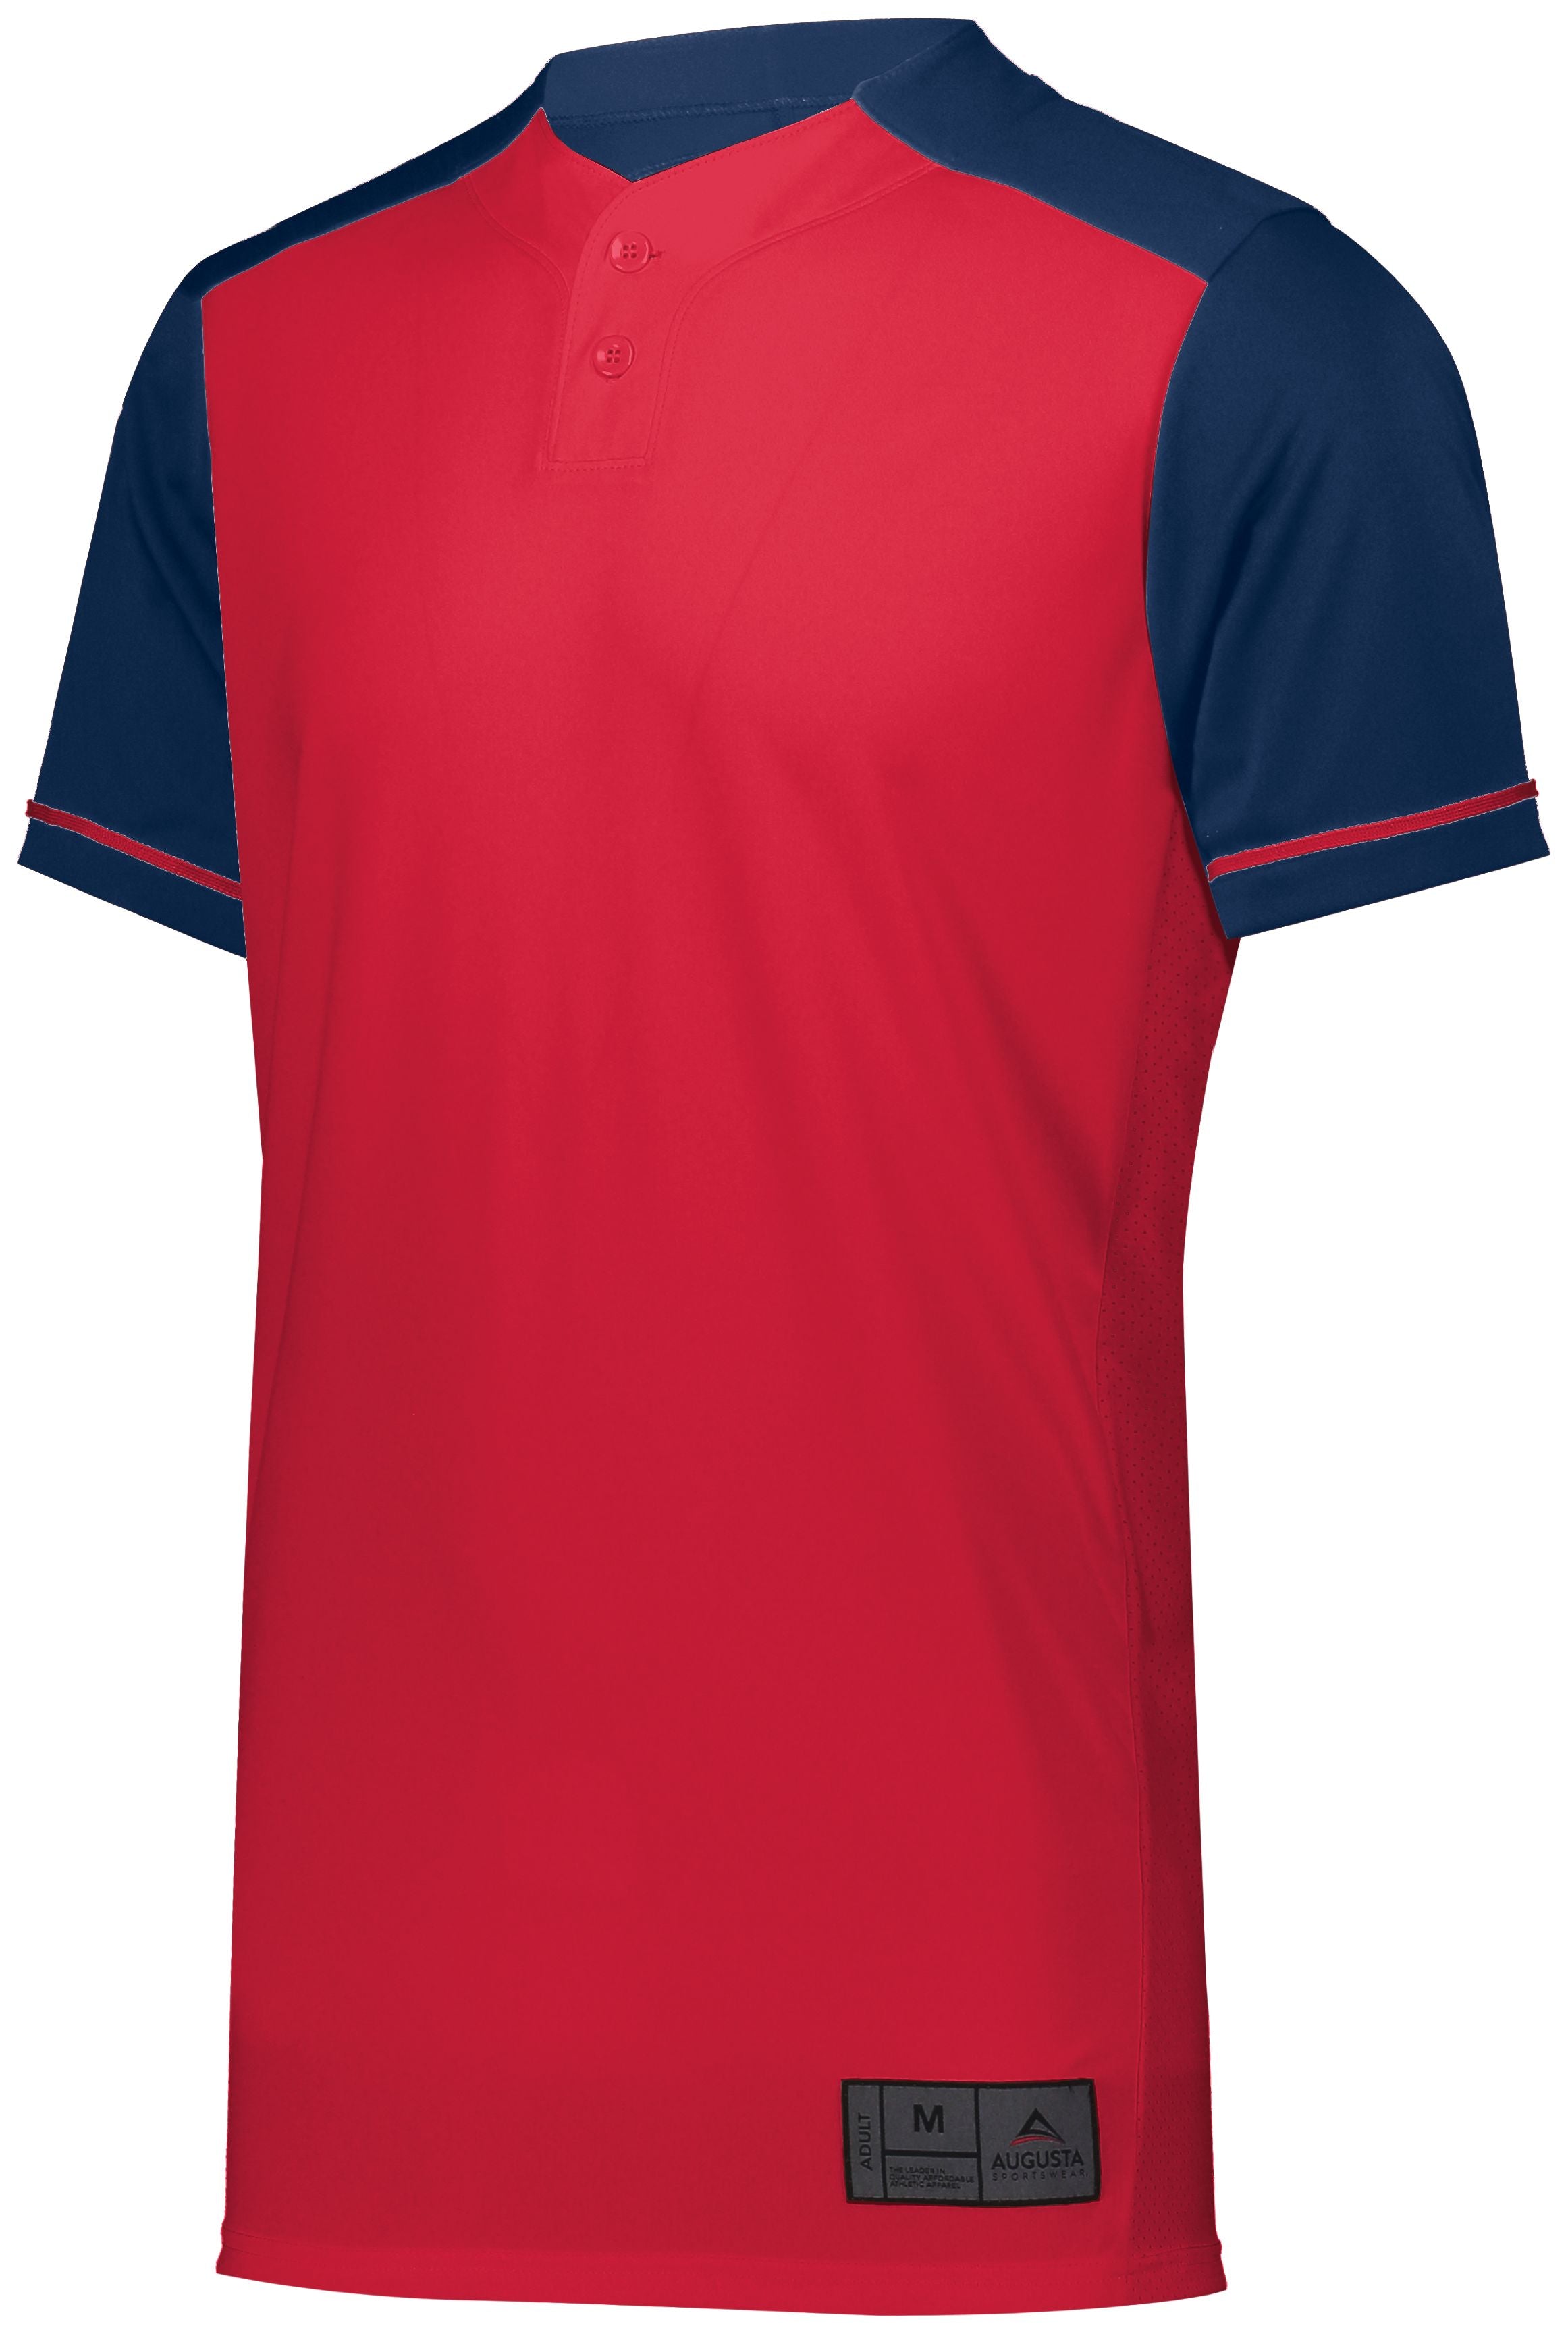 Augusta Sportswear Youth Closer Jersey in Scarlet/Navy  -Part of the Youth, Youth-Jersey, Augusta-Products, Baseball, Shirts, All-Sports, All-Sports-1 product lines at KanaleyCreations.com